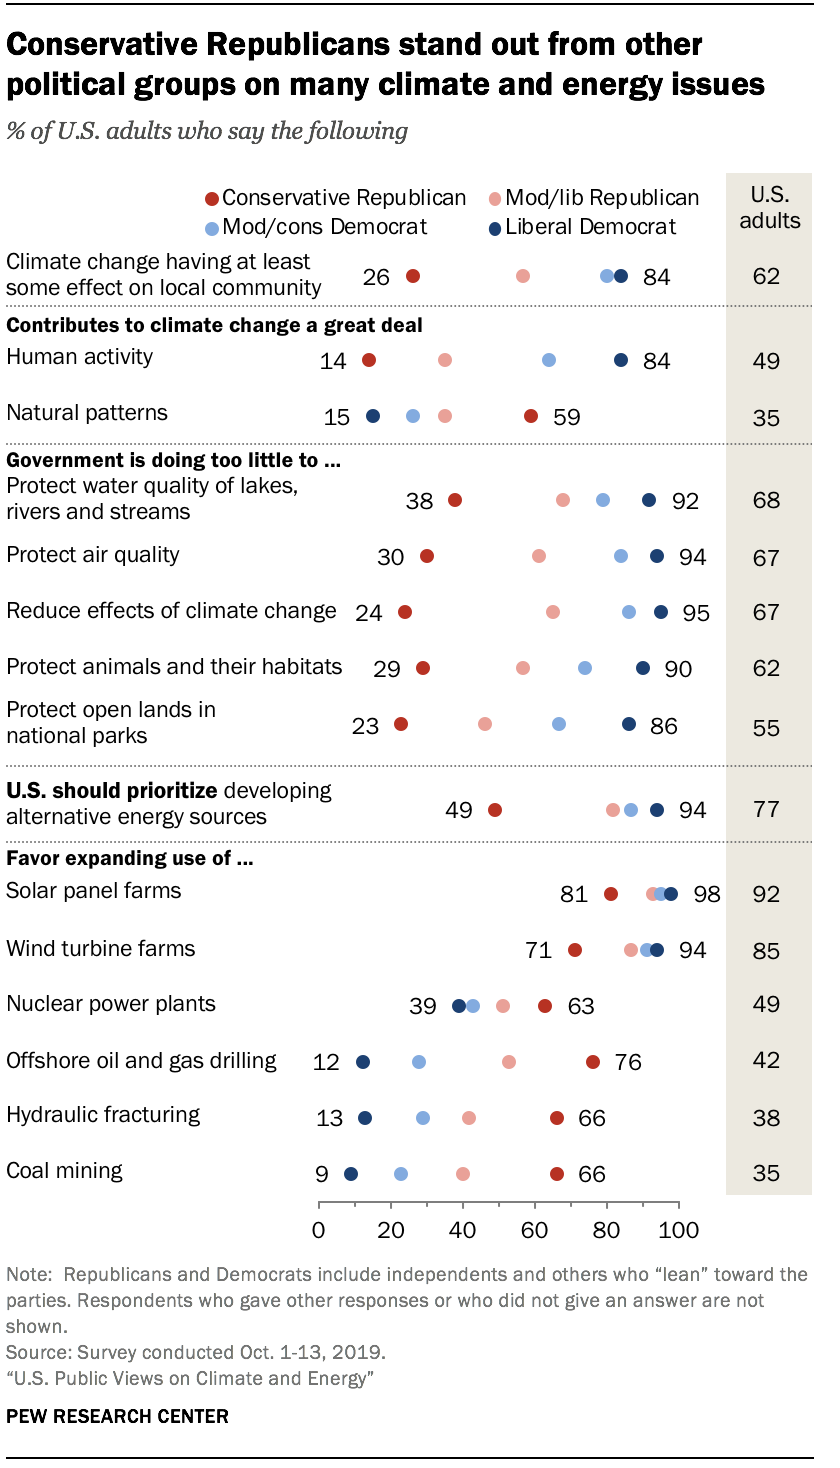 Conservative Republicans stand out from other political groups on many climate and energy issues